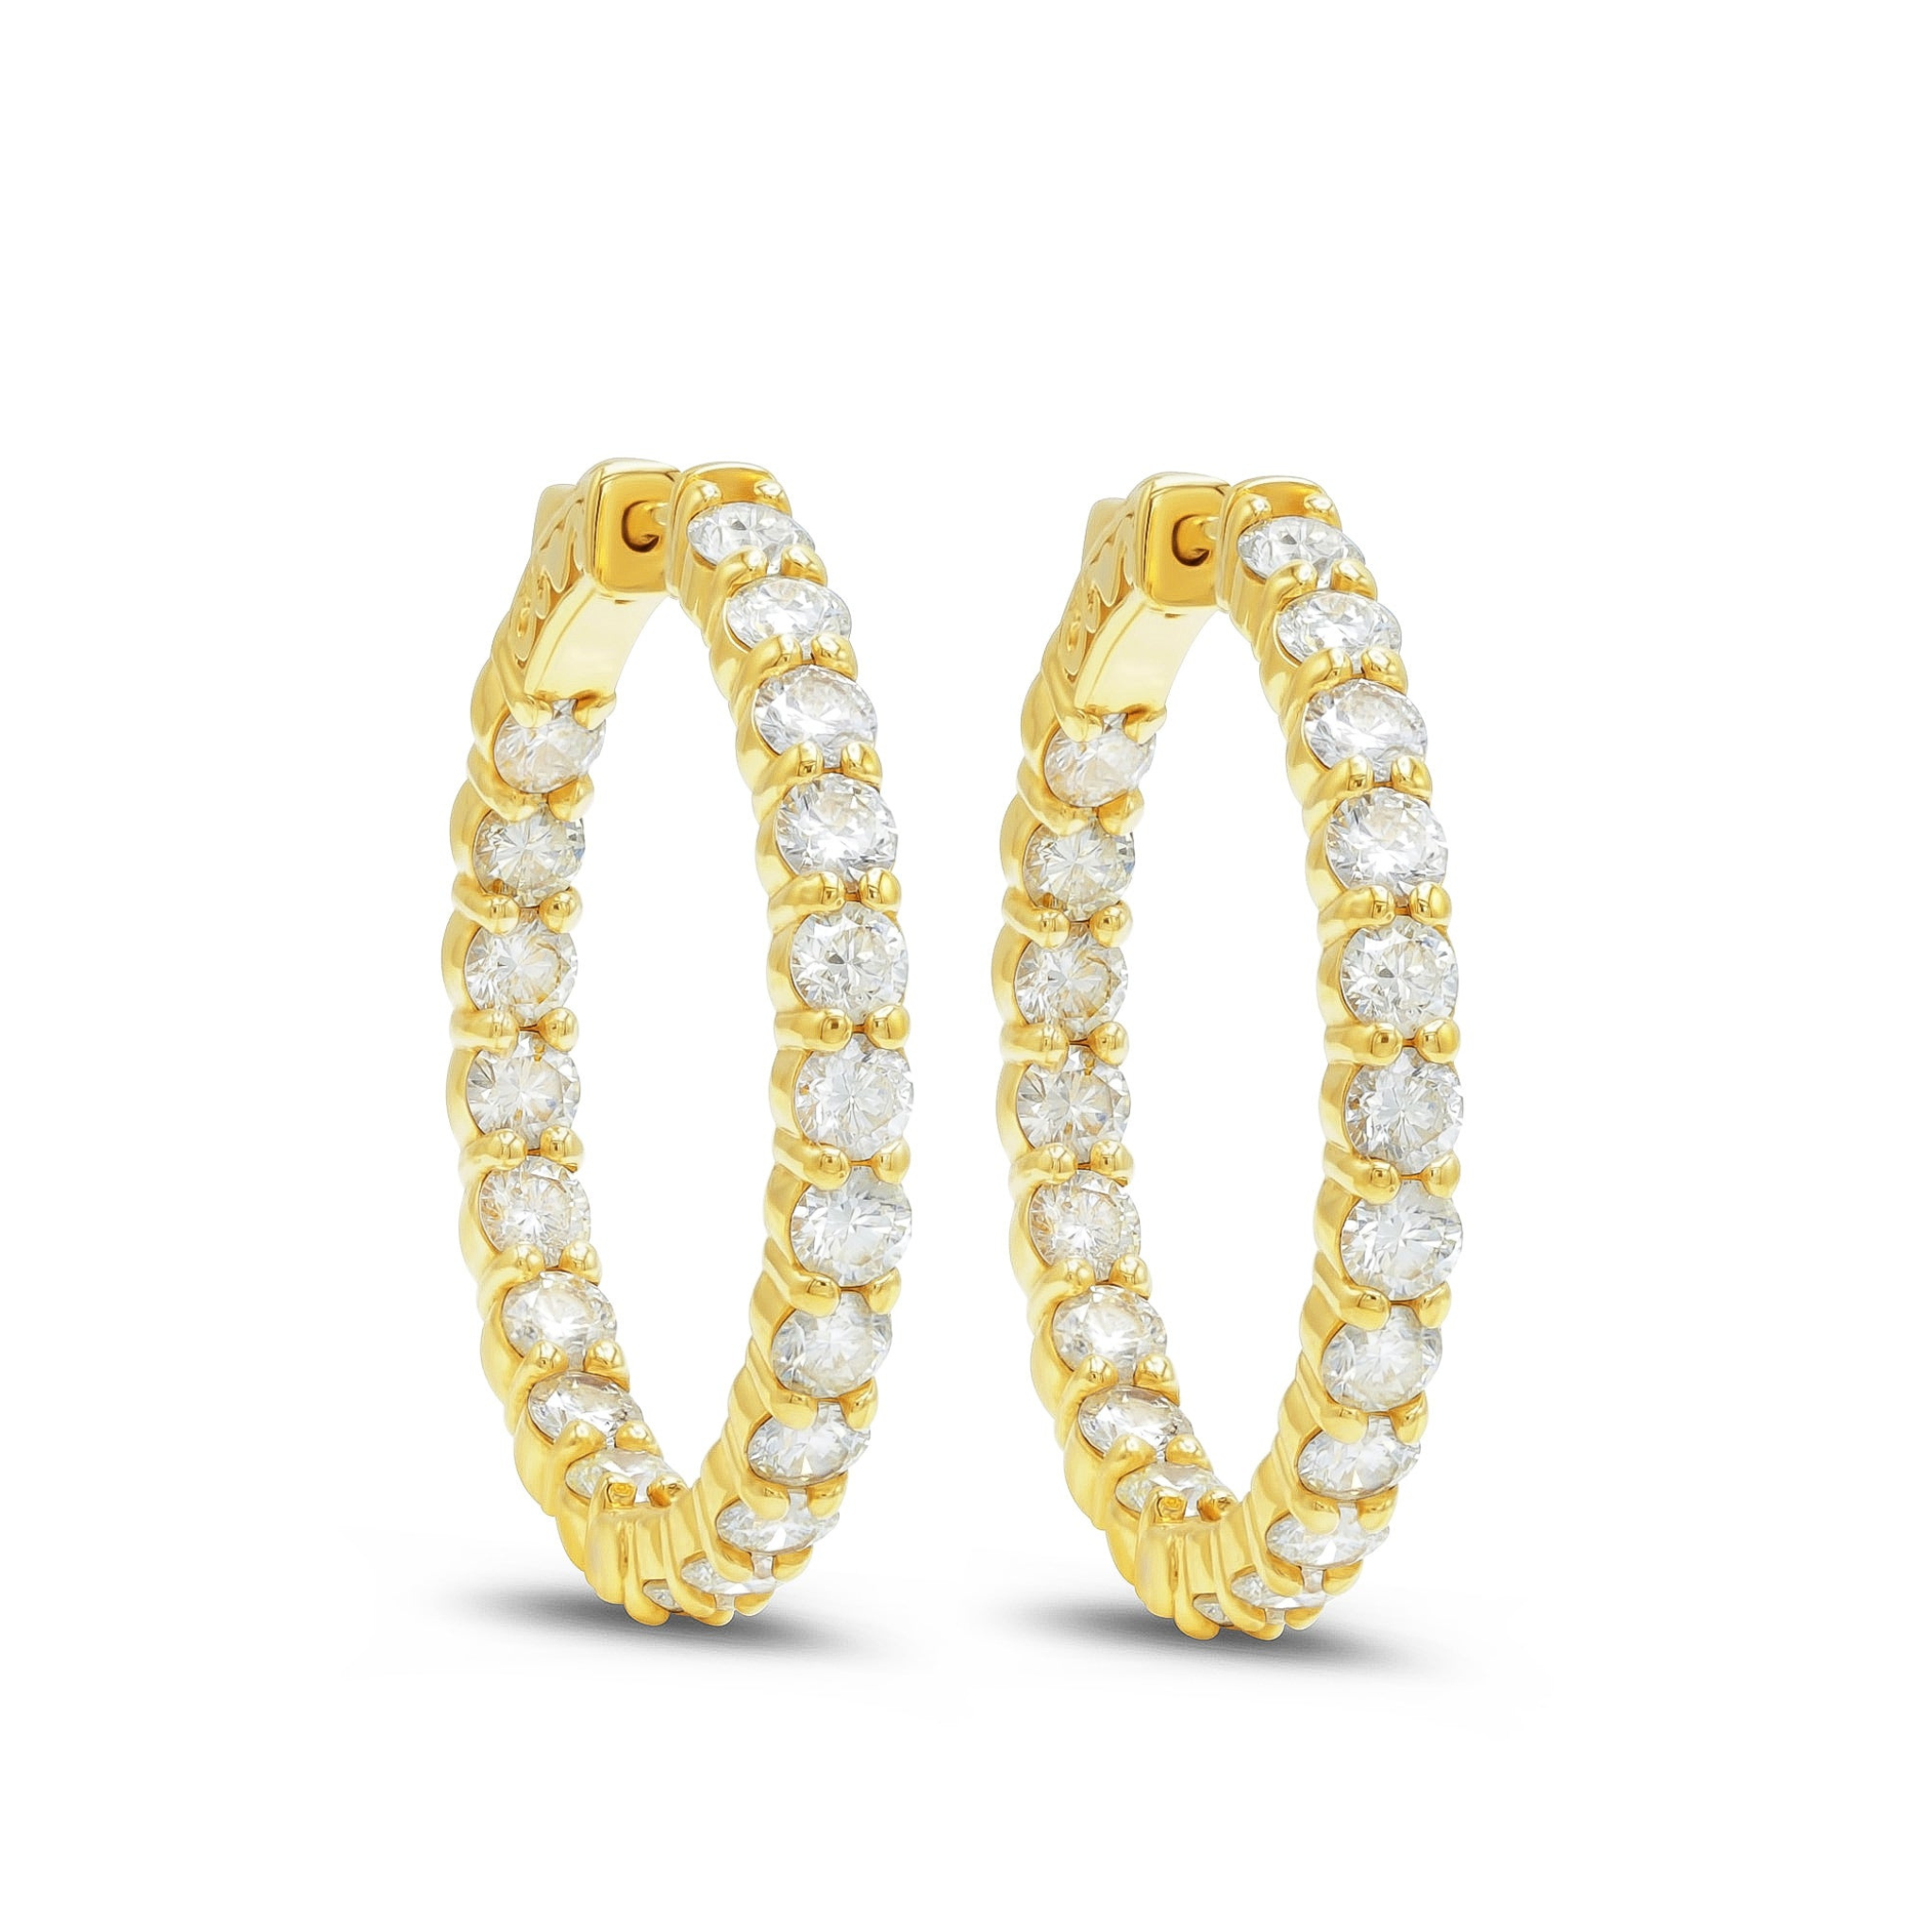 18 Kt Yellow Gold 1.00" Hoop Earrings with 5.25 cts.jpg